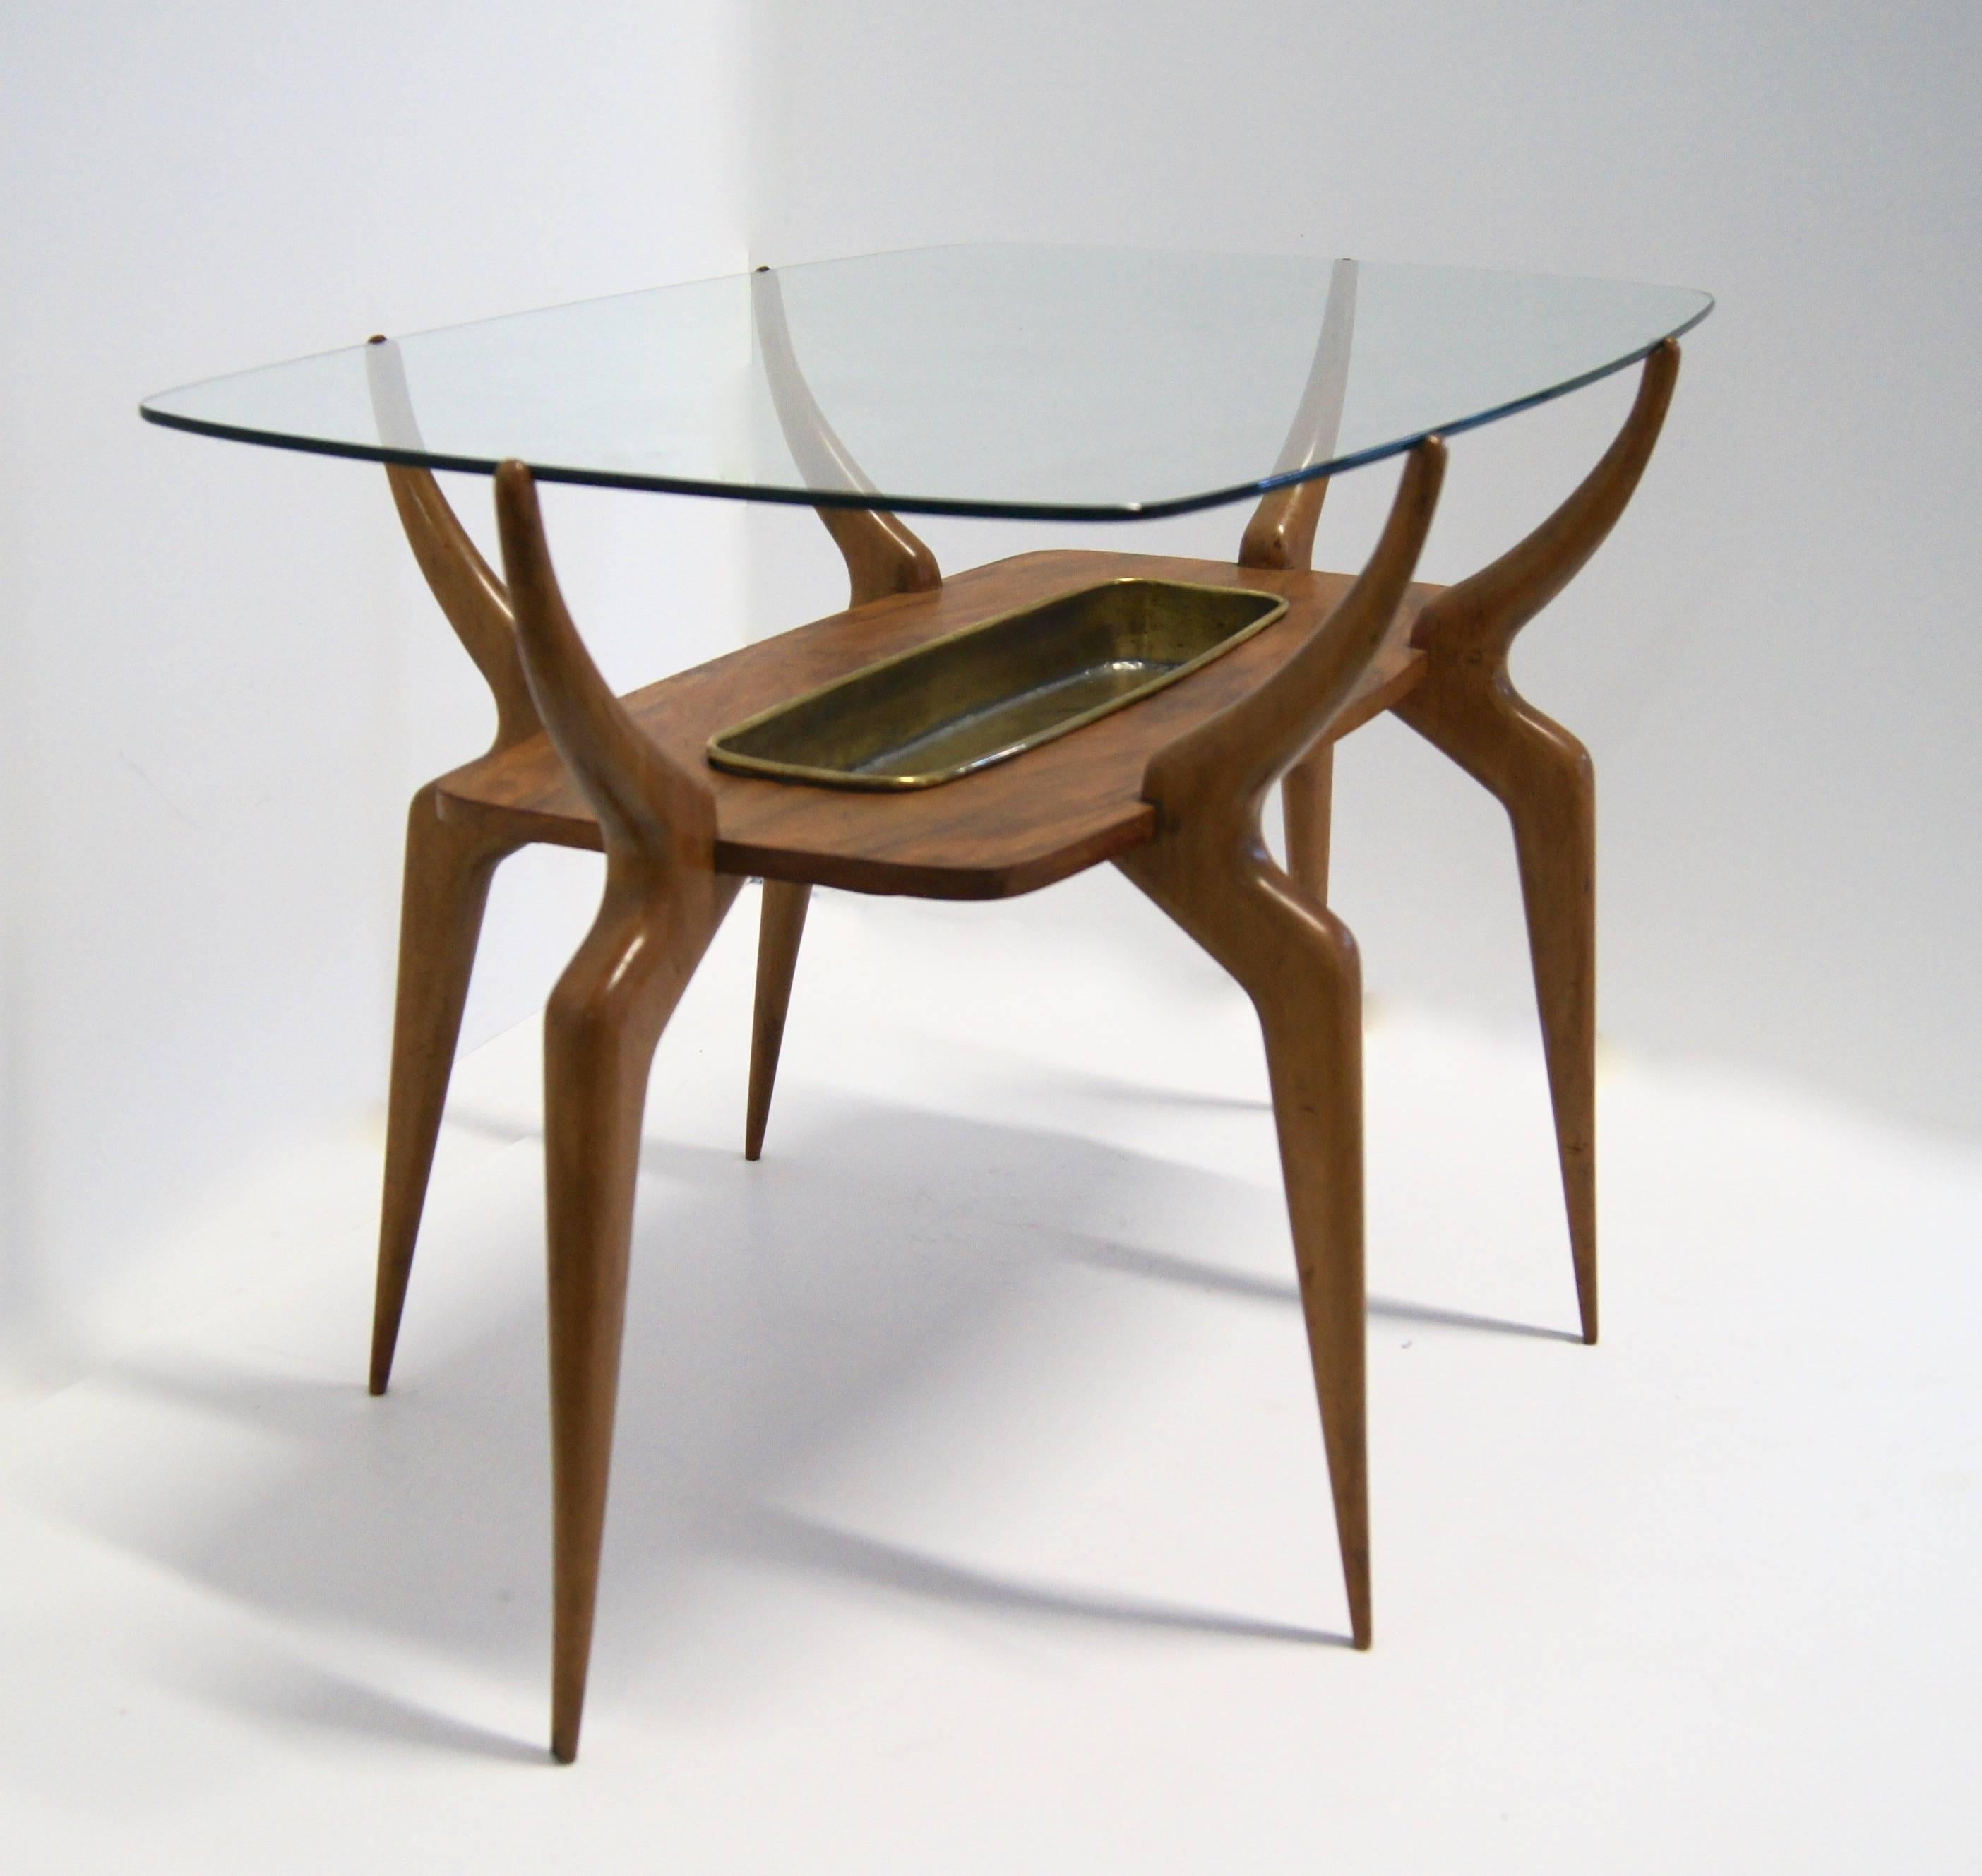 20th Century Italian Spider-Leg Cocktail Table Attributed to Ico Parisi